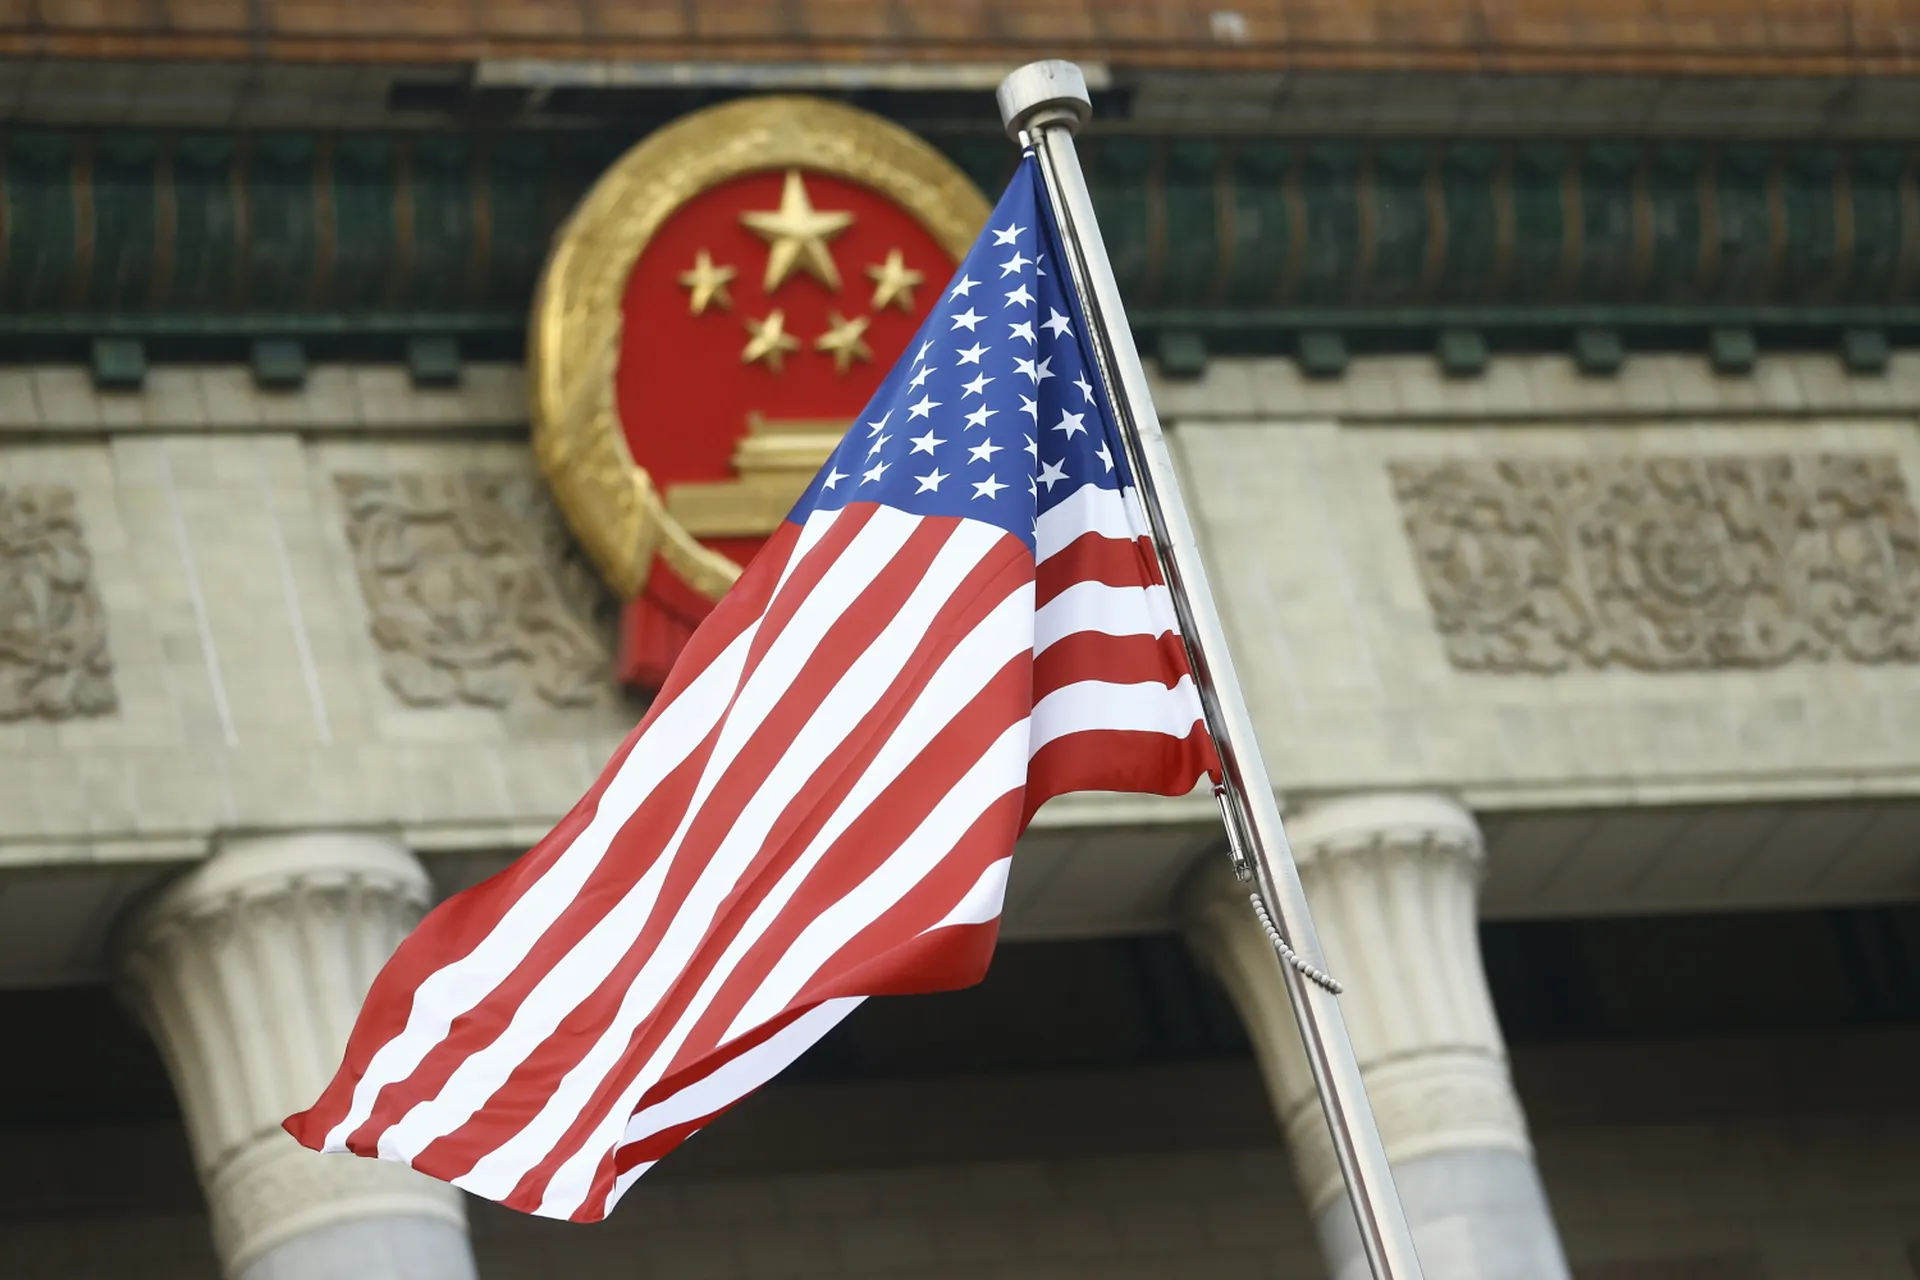 The U.S. flag flies at a welcoming ceremony between Chinese President Xi Jinping and U.S. President Donald Trump Nov. 9, 2017, in Beijing. The U.S. is sending mixed messages on how it deals with cyber threats by China and Russia, experts say. (Thomas Peter-Pool/Getty Images)